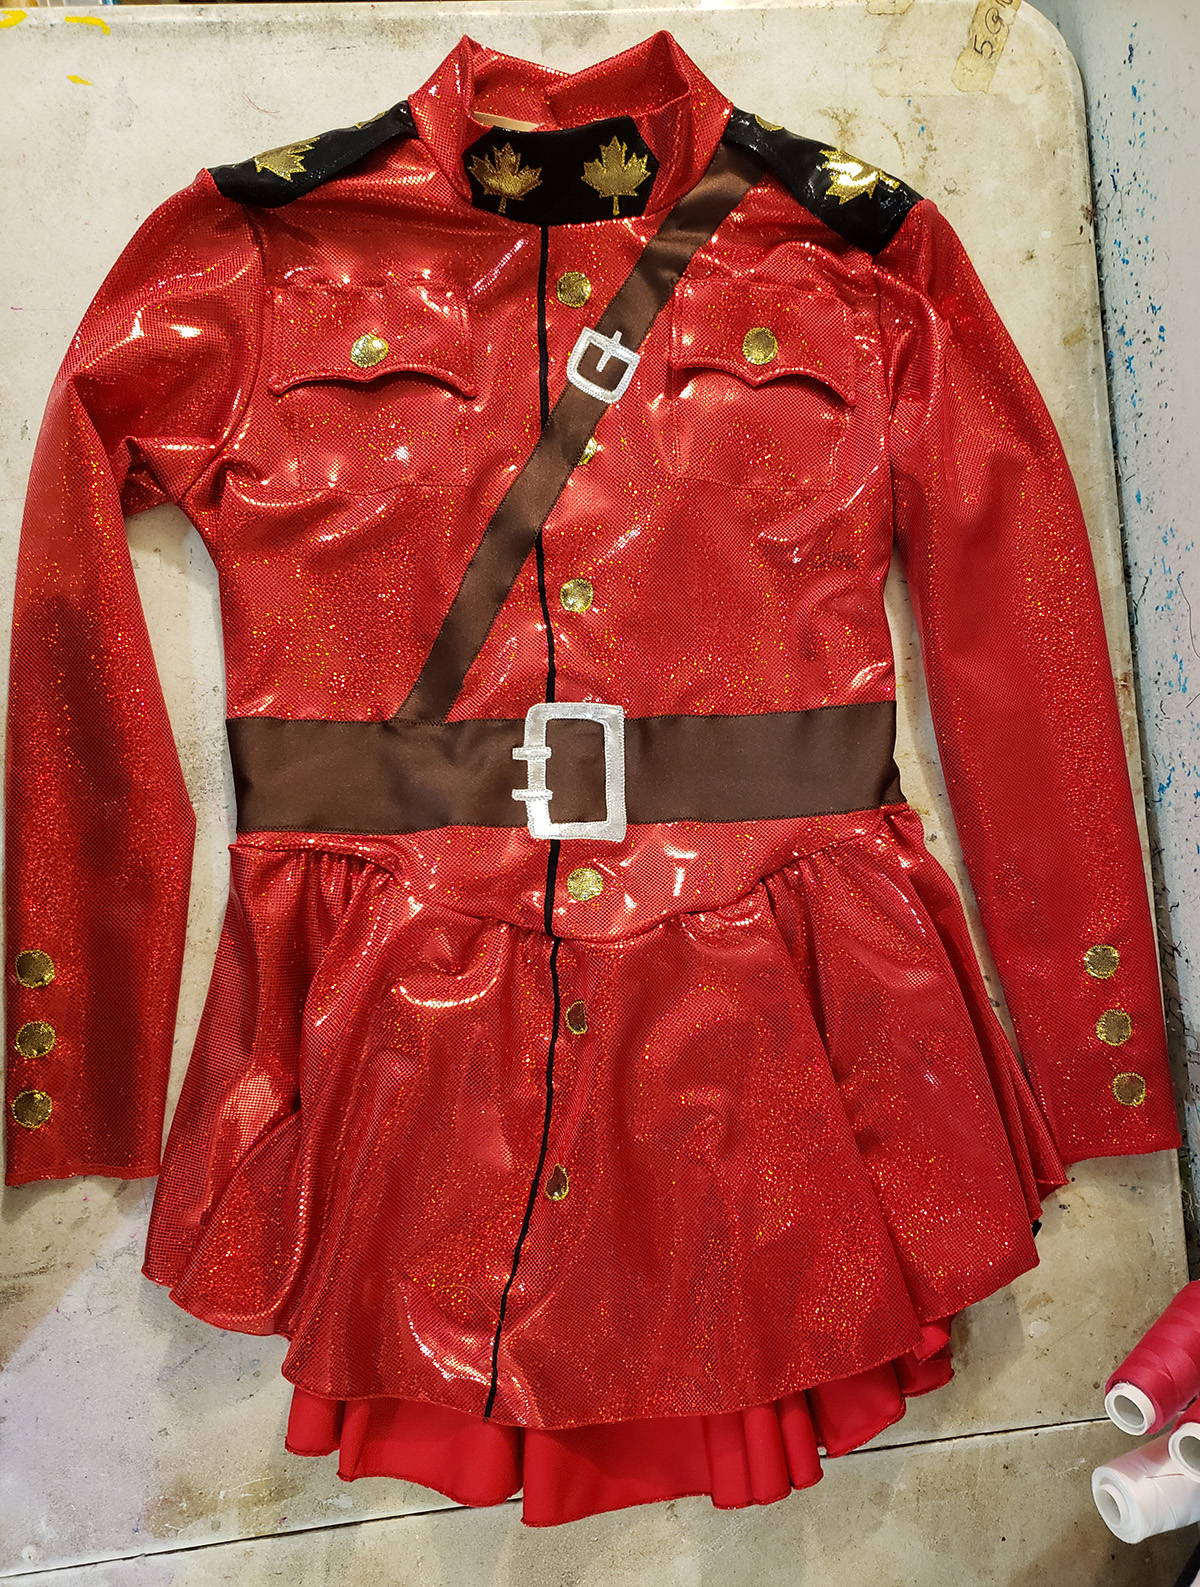 The finished Mountie dress